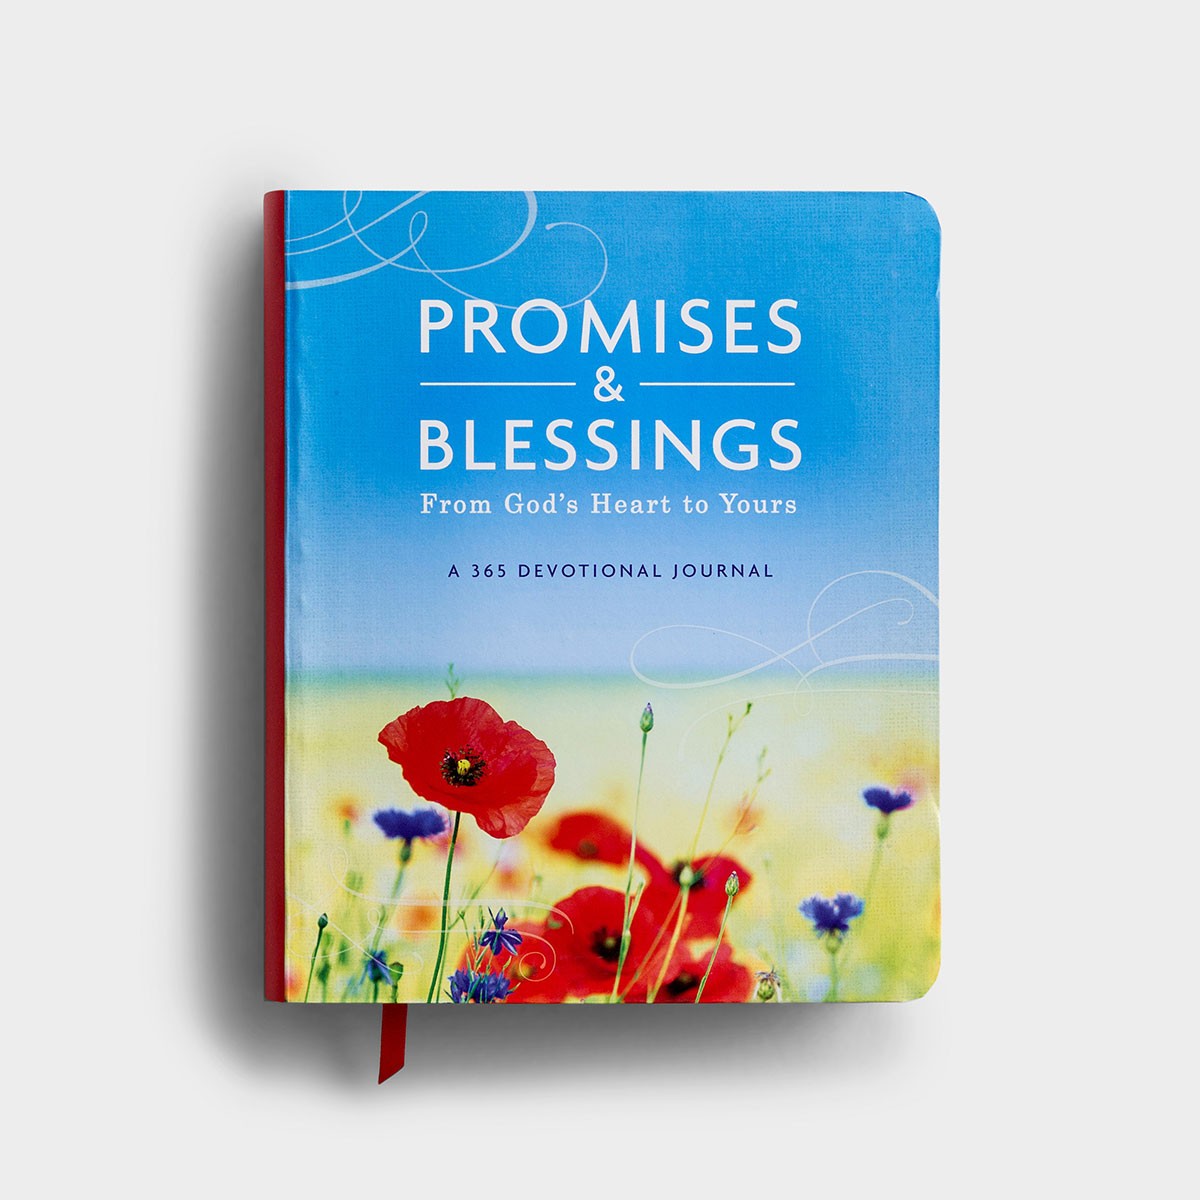 ROCKONLINE | Promises & Blessings From God's Heart to Yours 365-day Devotional Journal | Dayspring | Christian Living | Women | Christian Women | Devotional | Quiet Time | New Creation Church | NCC | Joseph Prince | ROCK Bookshop | ROCK Bookstore | Star Vista | Free delivery for Singapore Orders above $50.